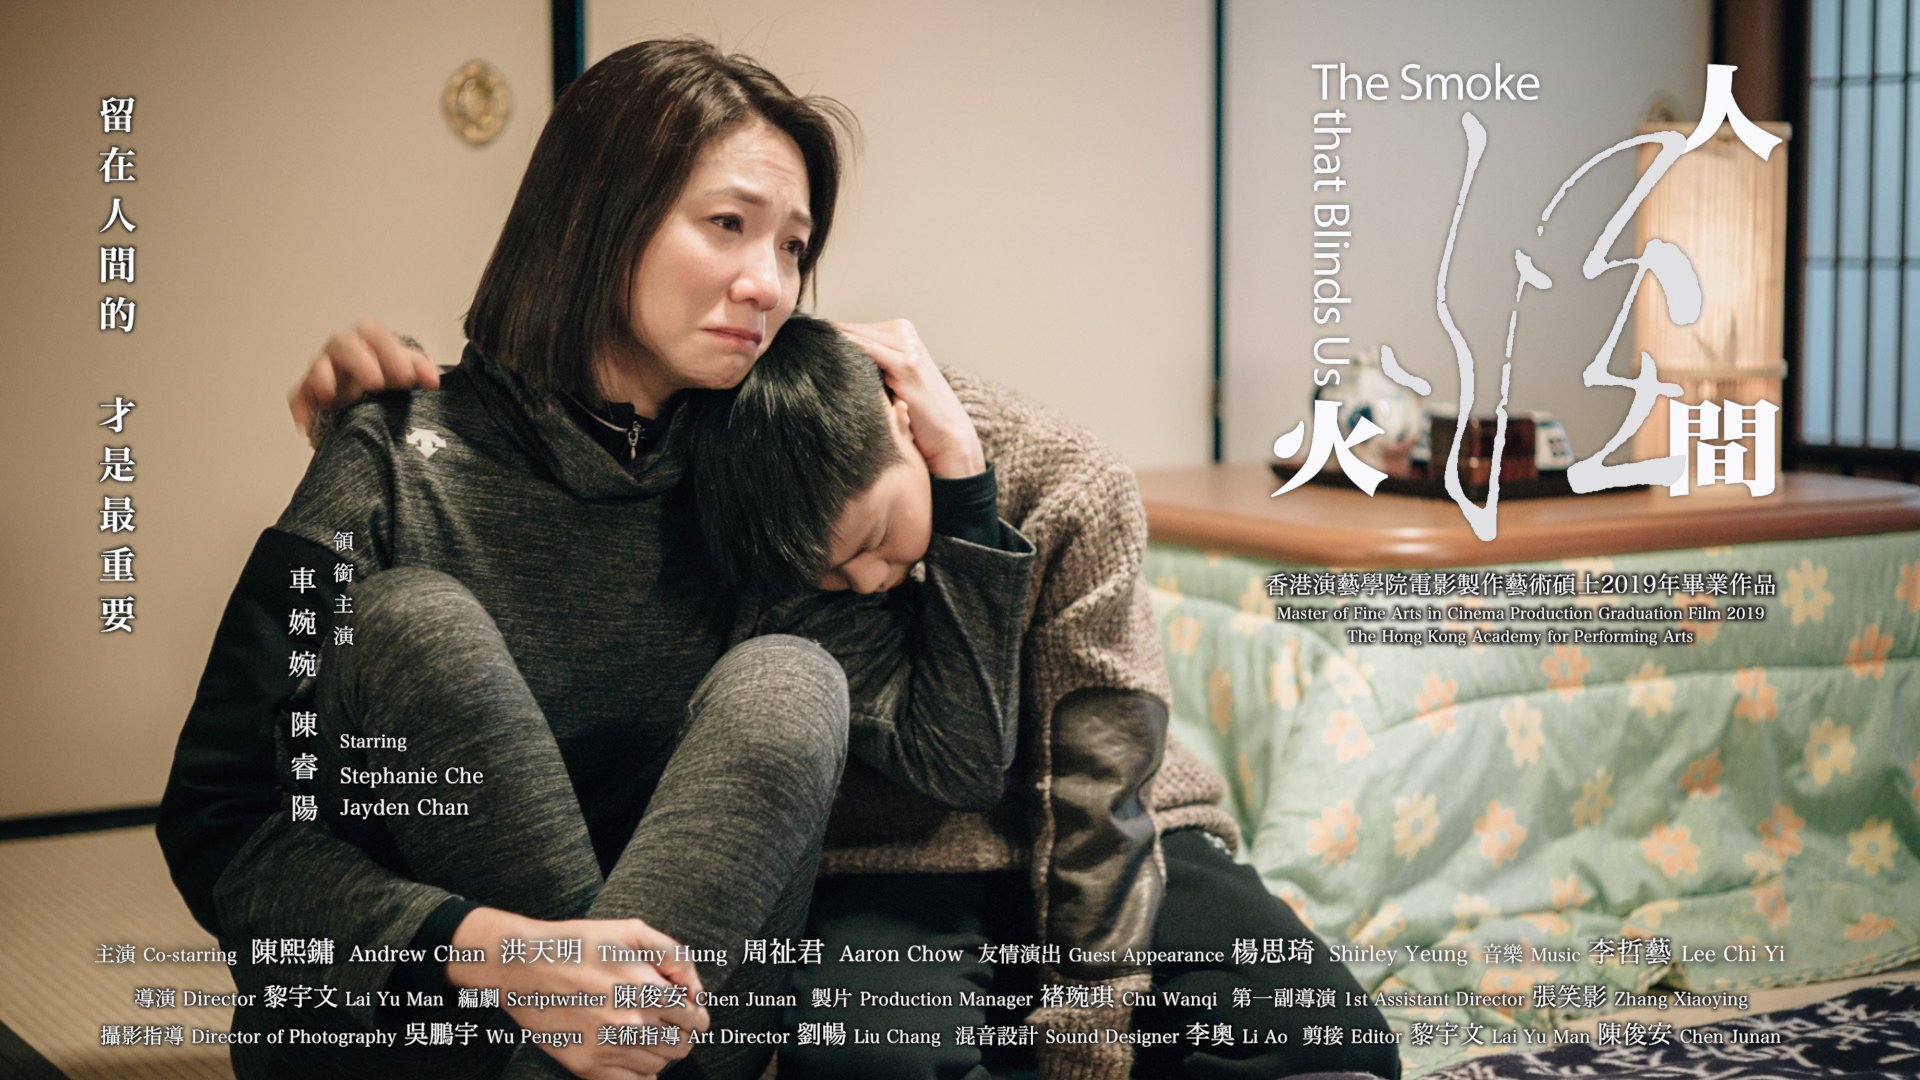 THE SMOKE THAT BLINDS US_poster4.jpg